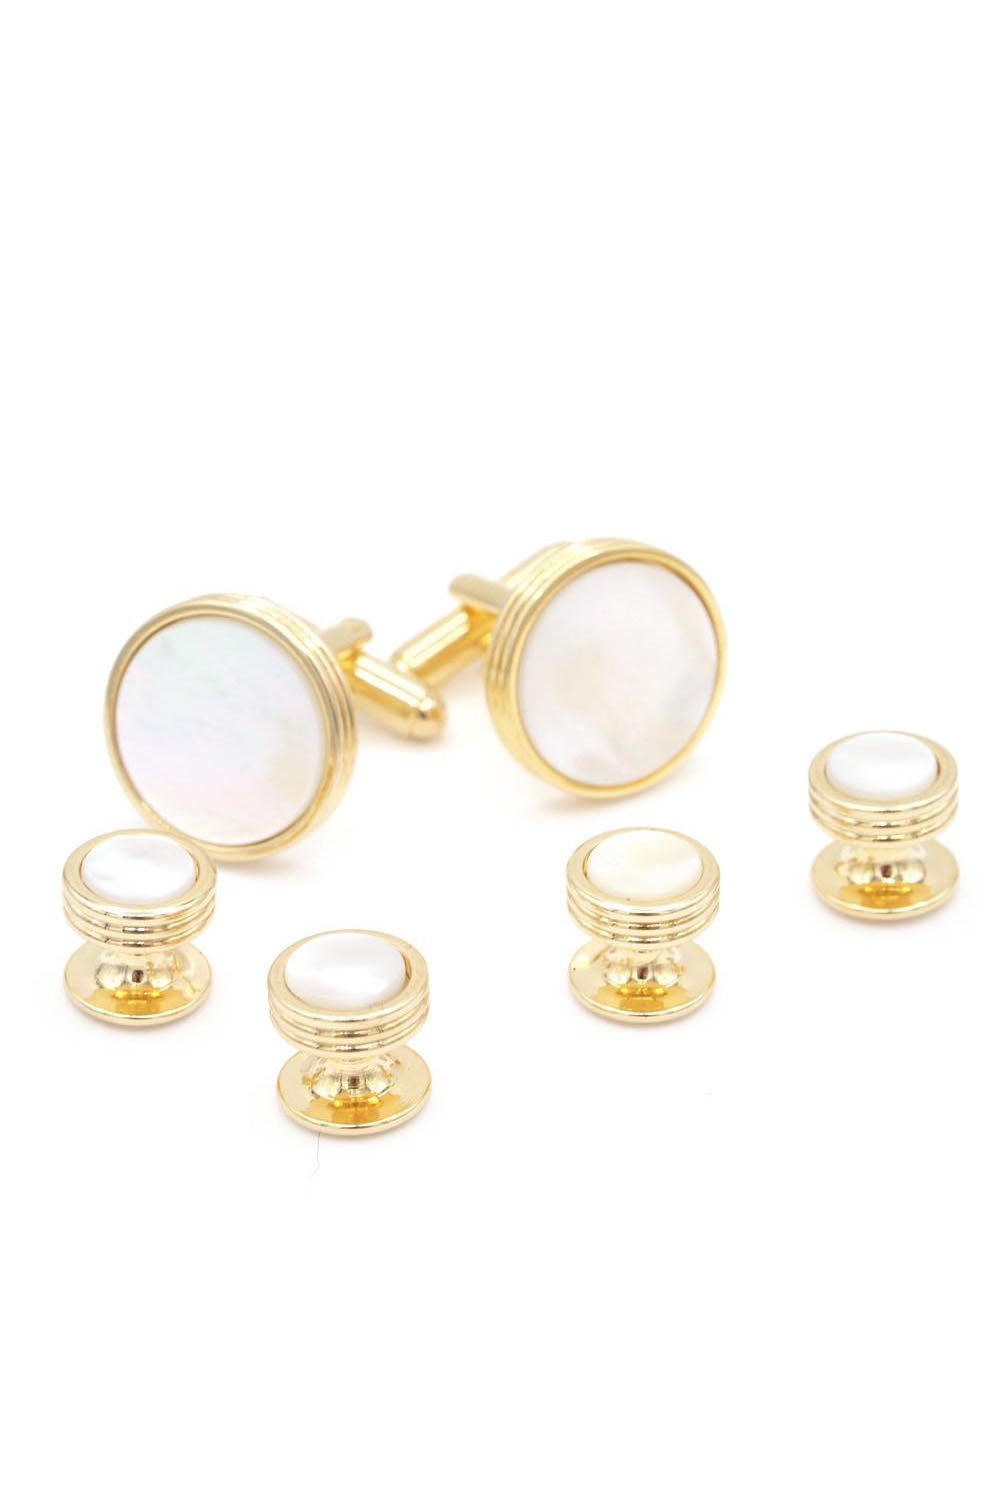 JJ Weston Triple Edge Mother of Pearl Gold Studs and Cufflinks Set